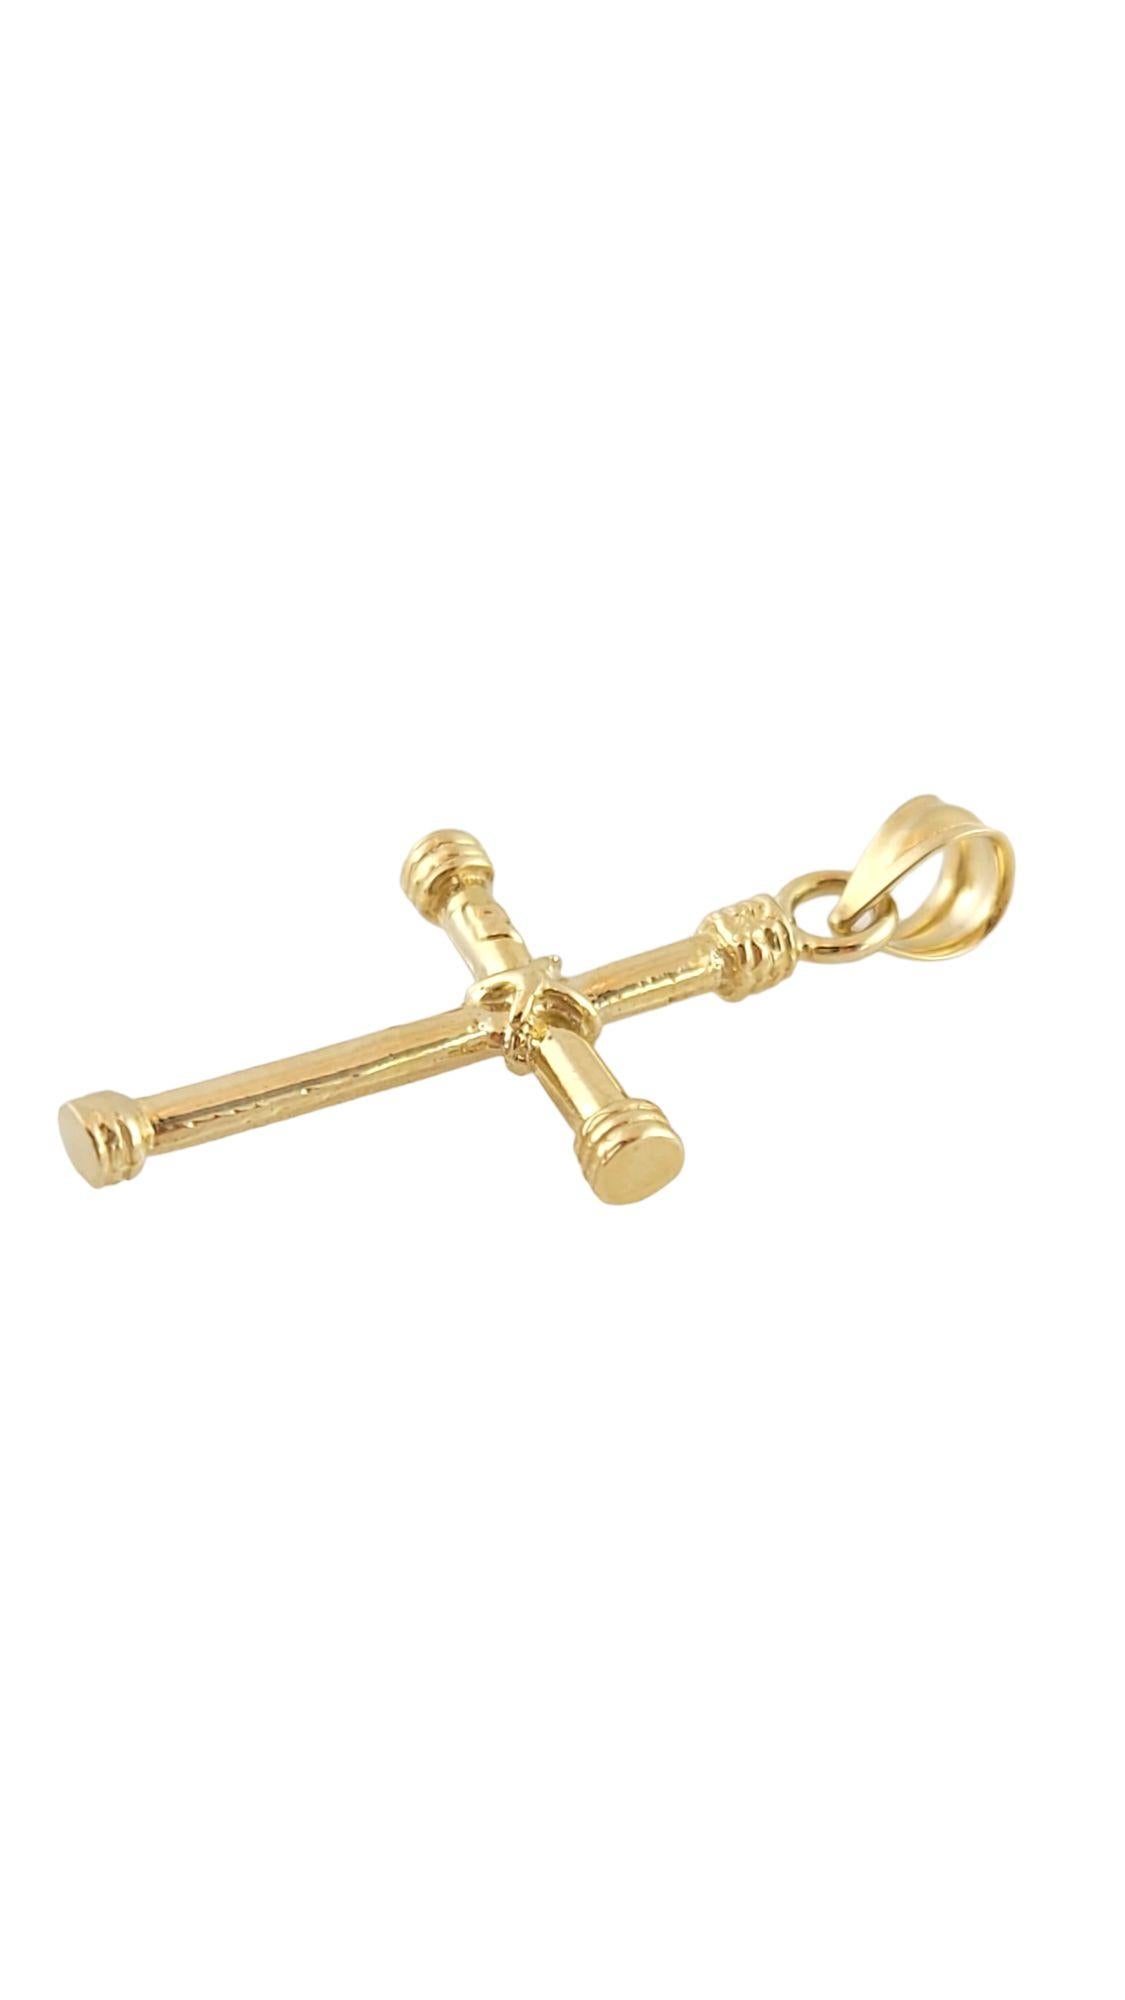 Beautiful 14K yellow gold cross pendant.

Dimensions: 25mm X 14mm (without bail)

Dimensions with bail: 29mm X 14mm

Weight:  1.4gr / 0.9 dwt

Hallmark: 14K OZ

Very good condition, professionally polished.

Will come packaged in a gift box and will